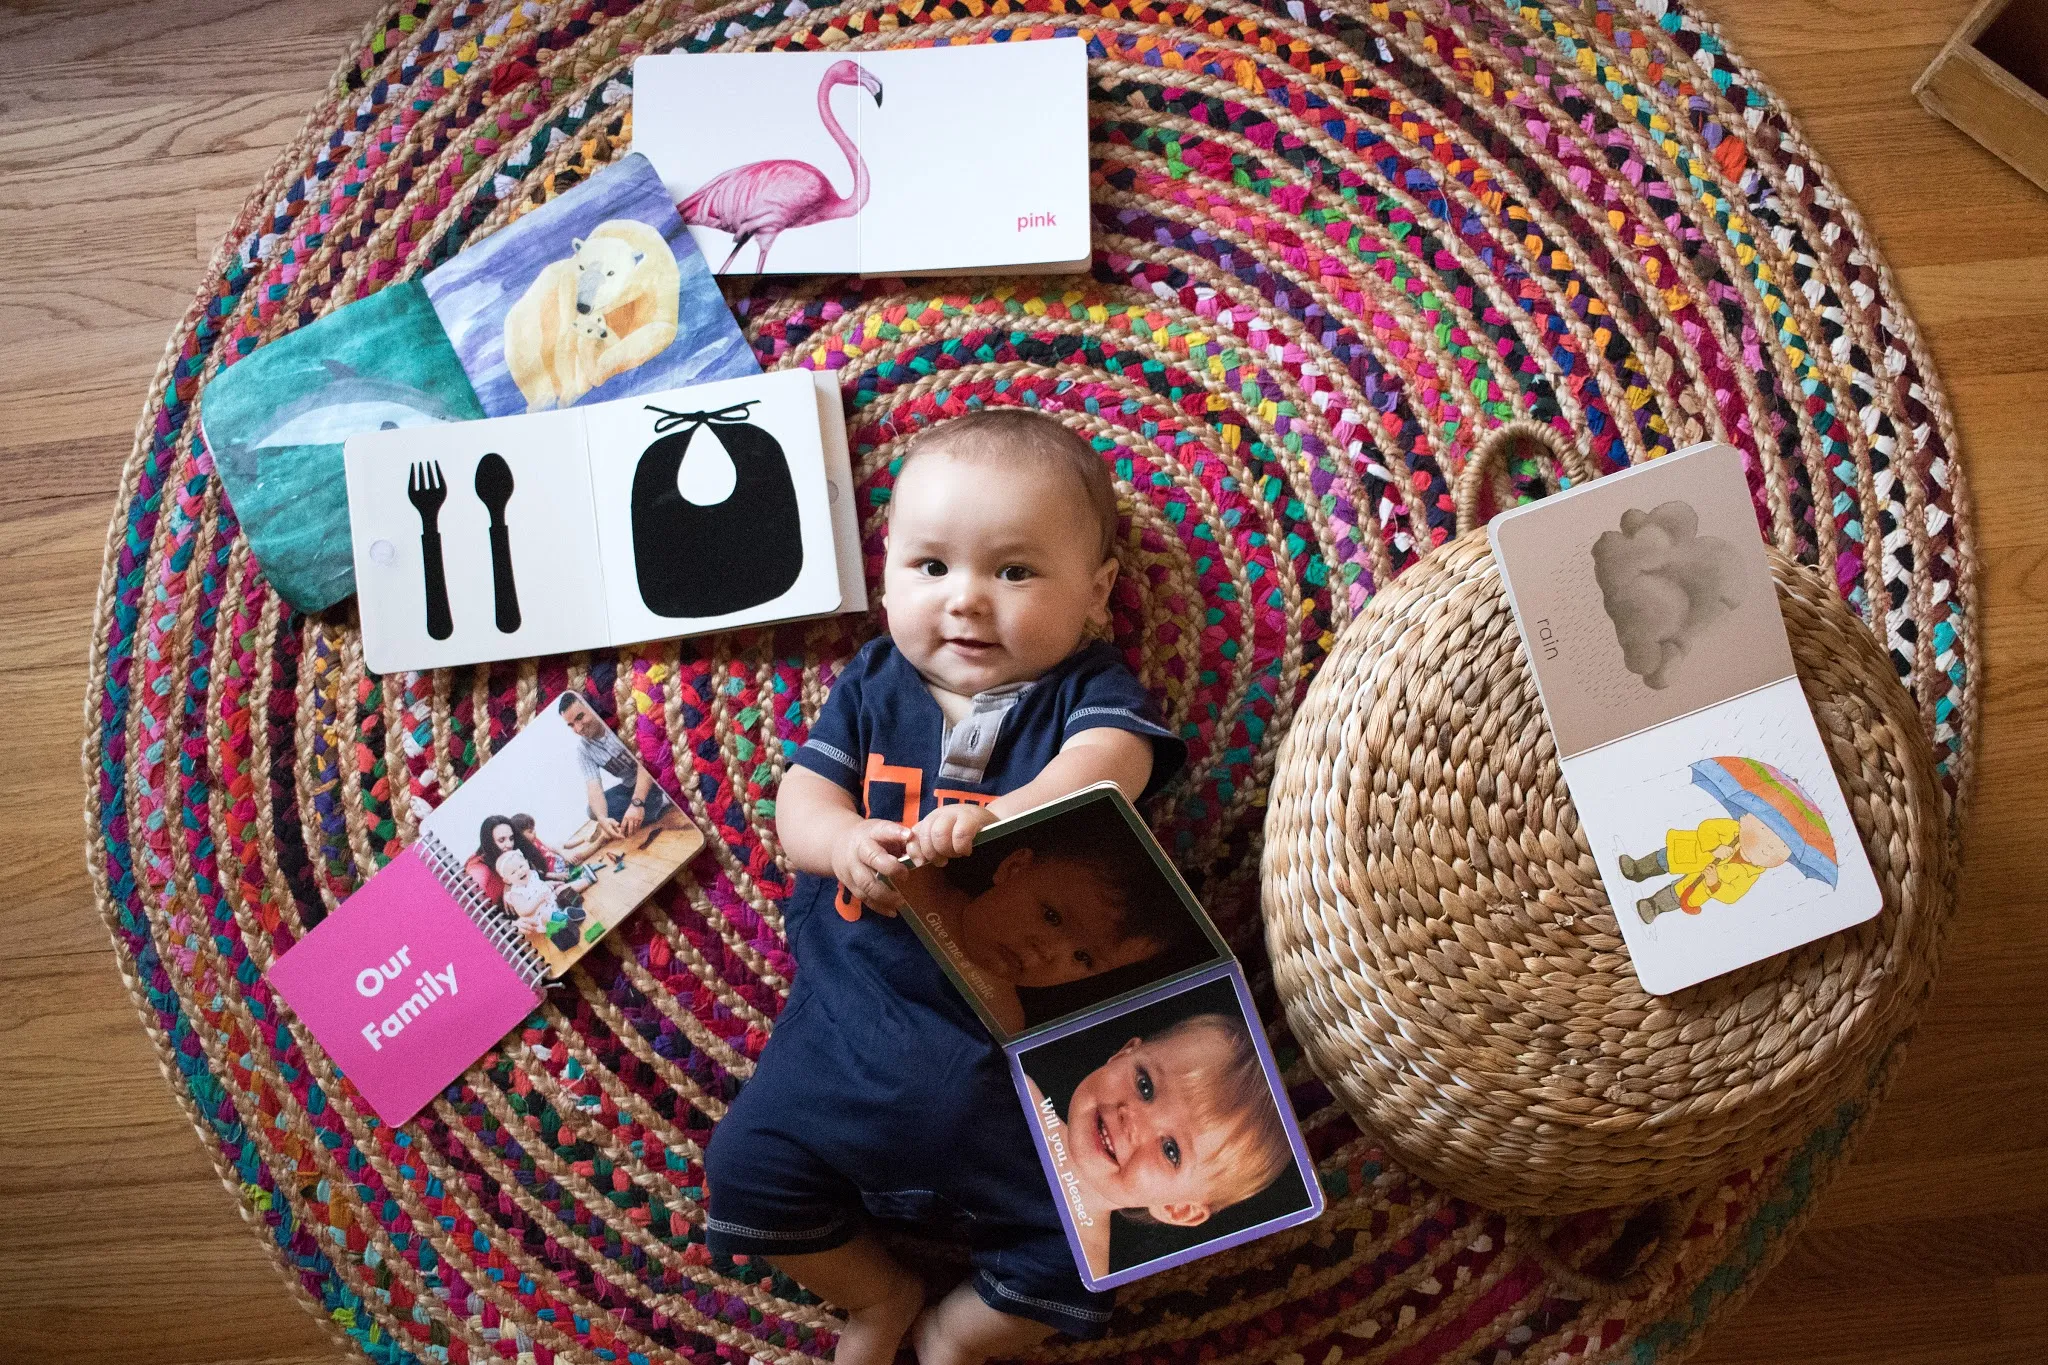 Reading to your baby from birth is a great way to connect to your baby and help them learn. Here are 5 tips to keep in mind when reading to your baby!